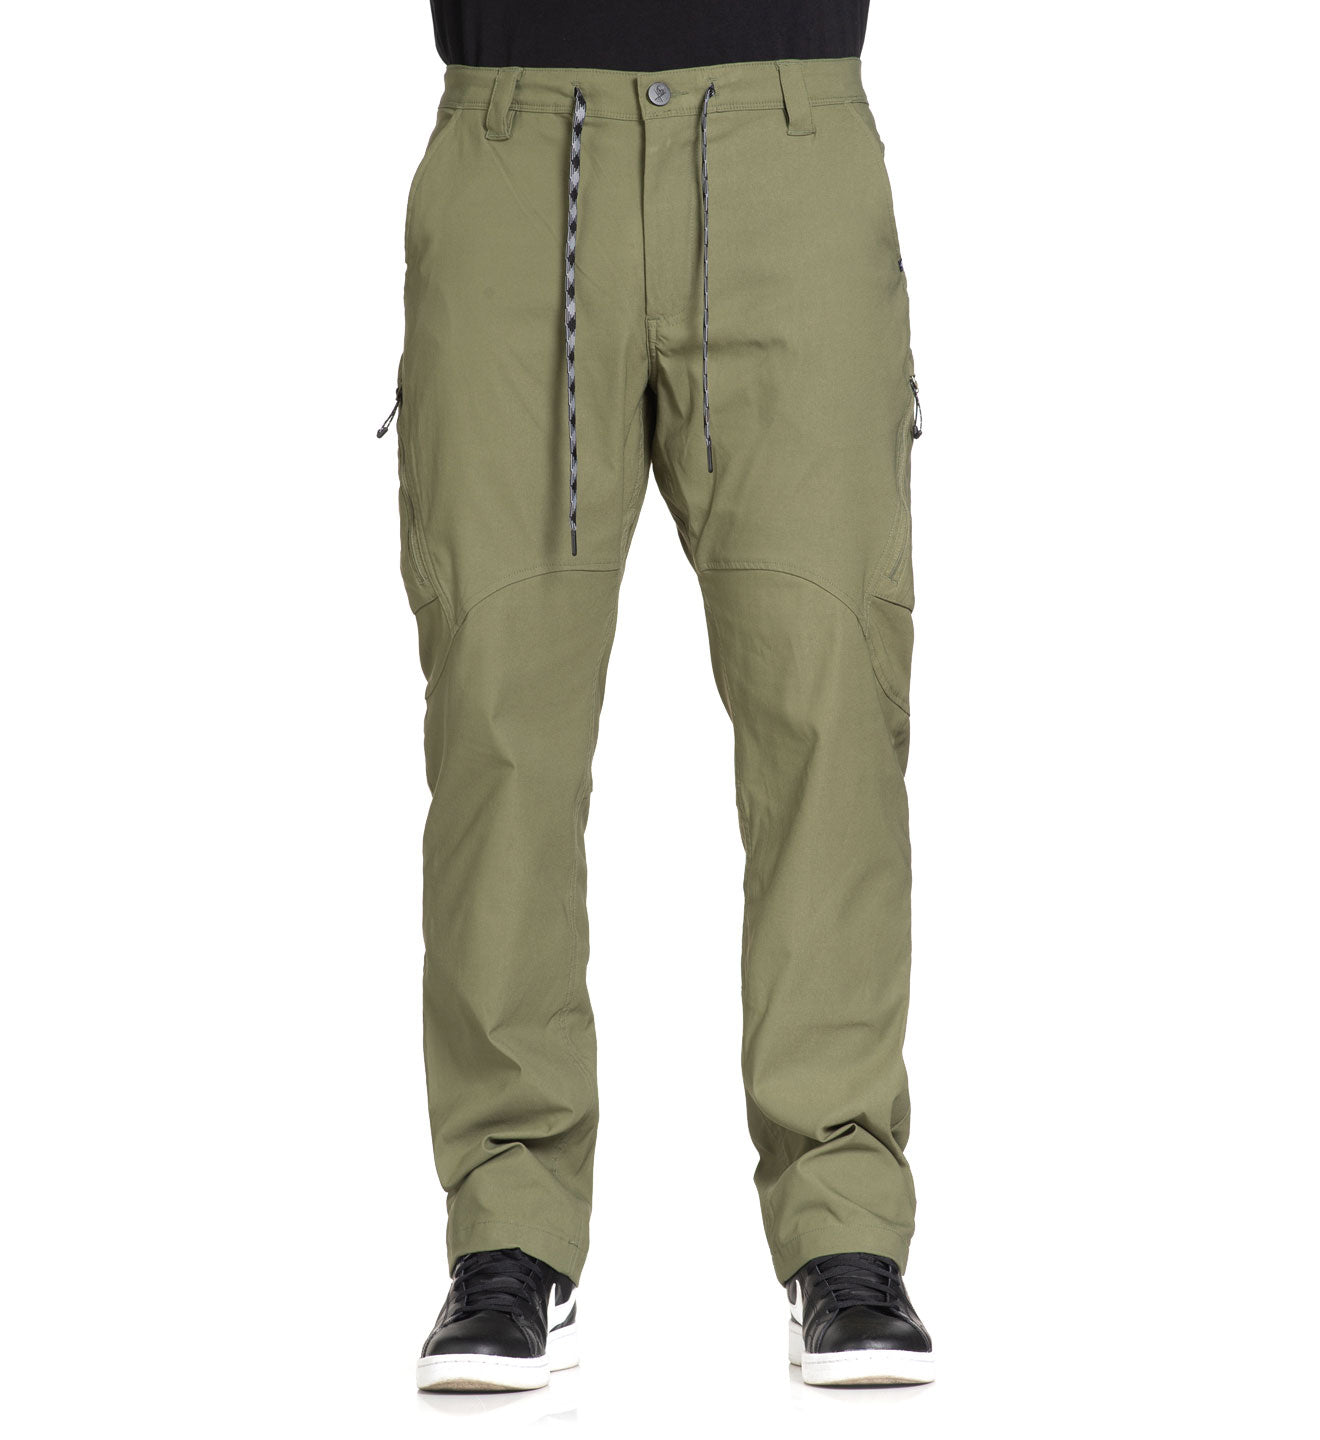 Mens Pants | Chino Pants | Relaxed Fit Pants | Sullen Clothing